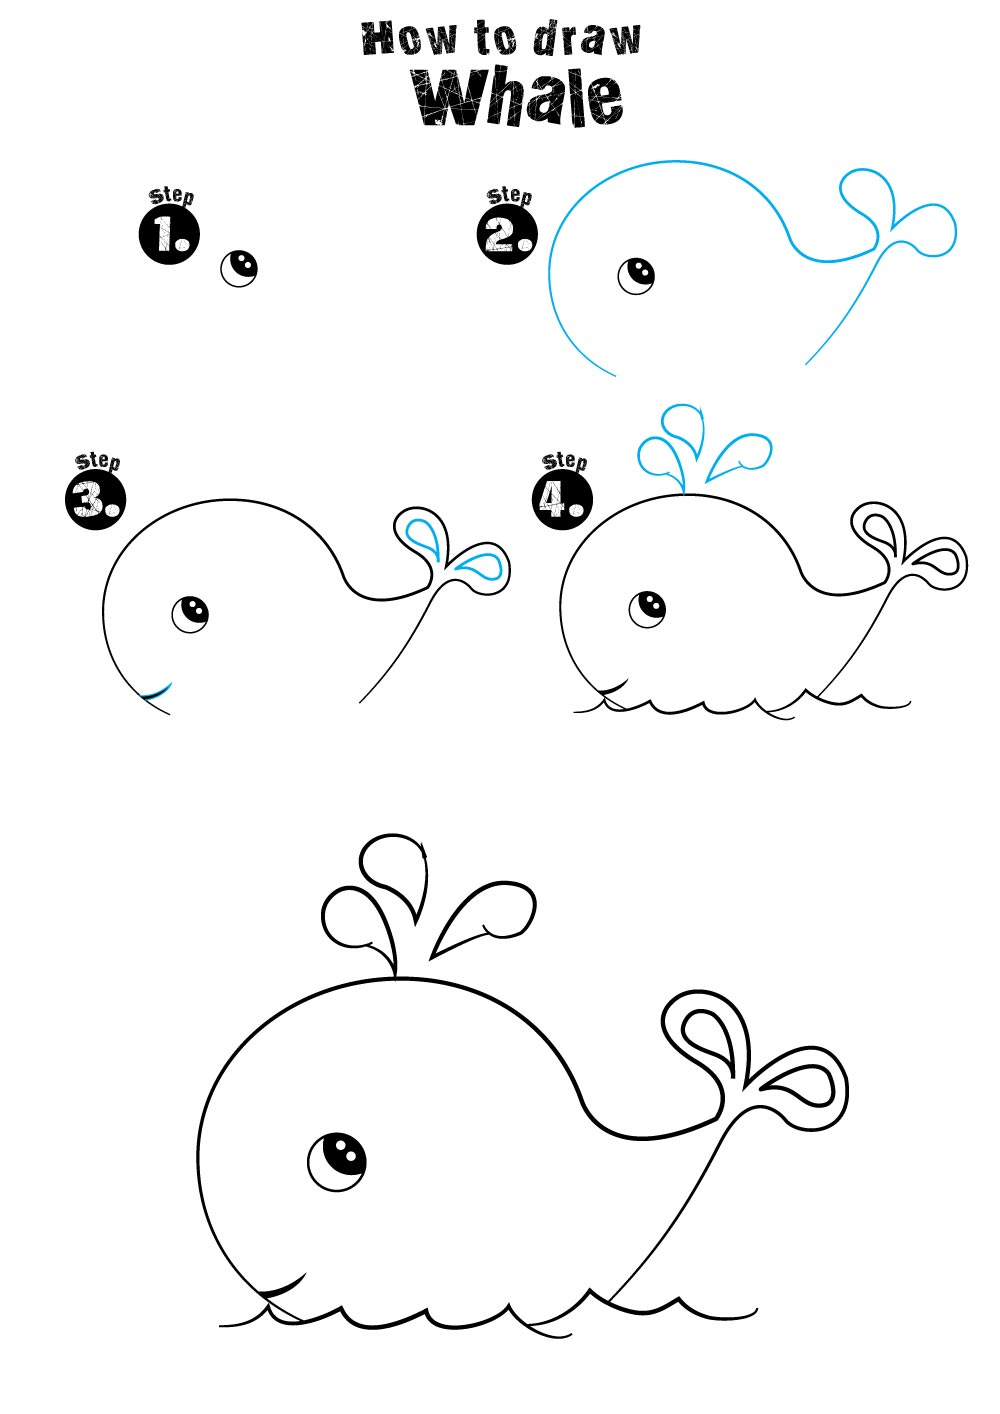 How To Draw A Whale Step By Step For Beginners